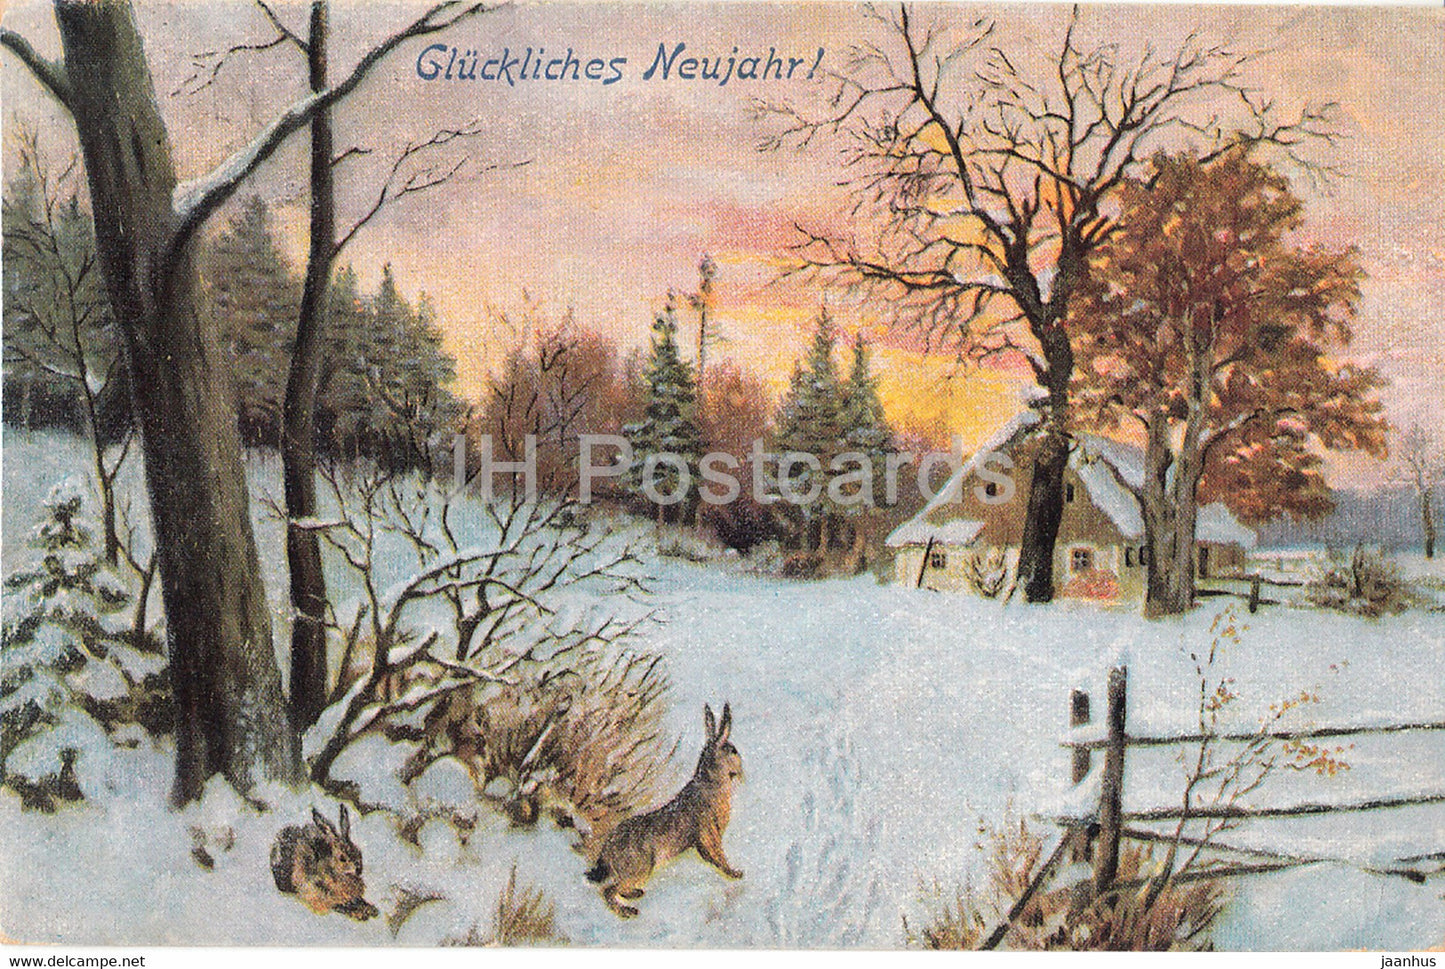 New Year Greeting Card - Gluckliches Neujahr - hare - house - 1076 - old postcard - 1926 - Germany - used - JH Postcards